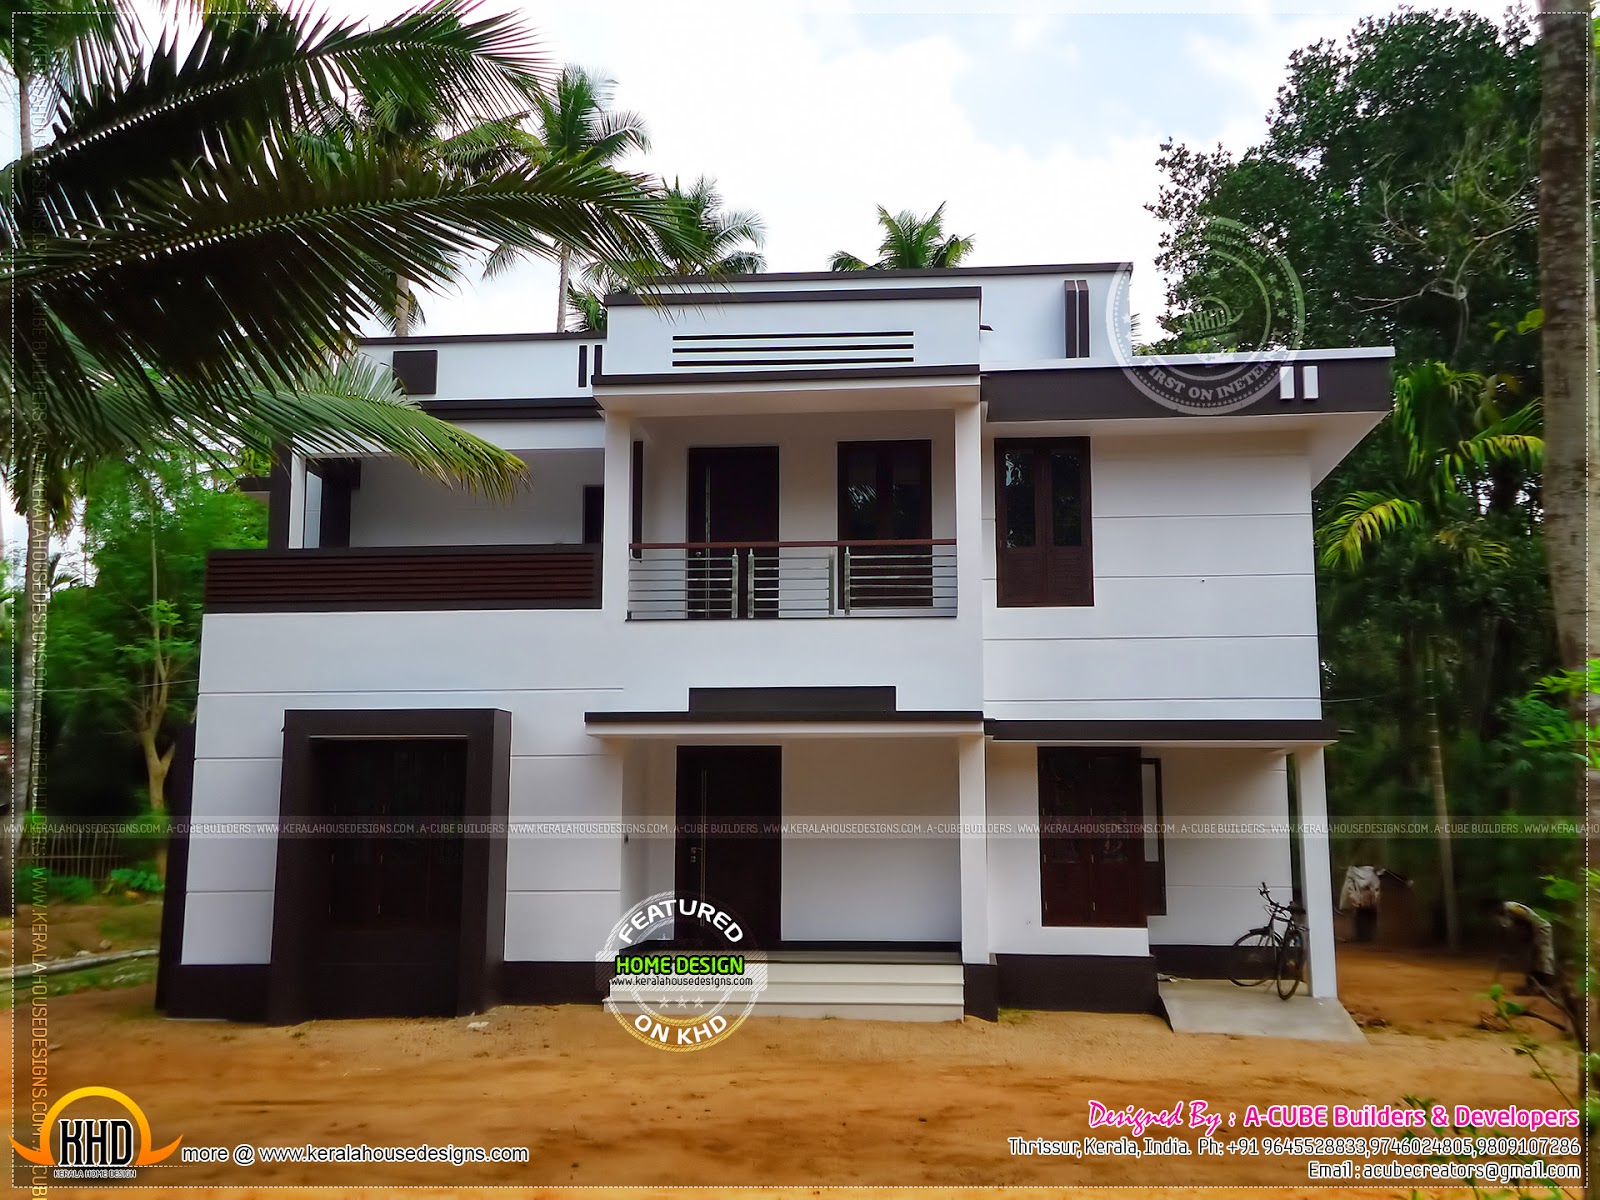  Front  View  Of House  Design  In India  Interior Design 